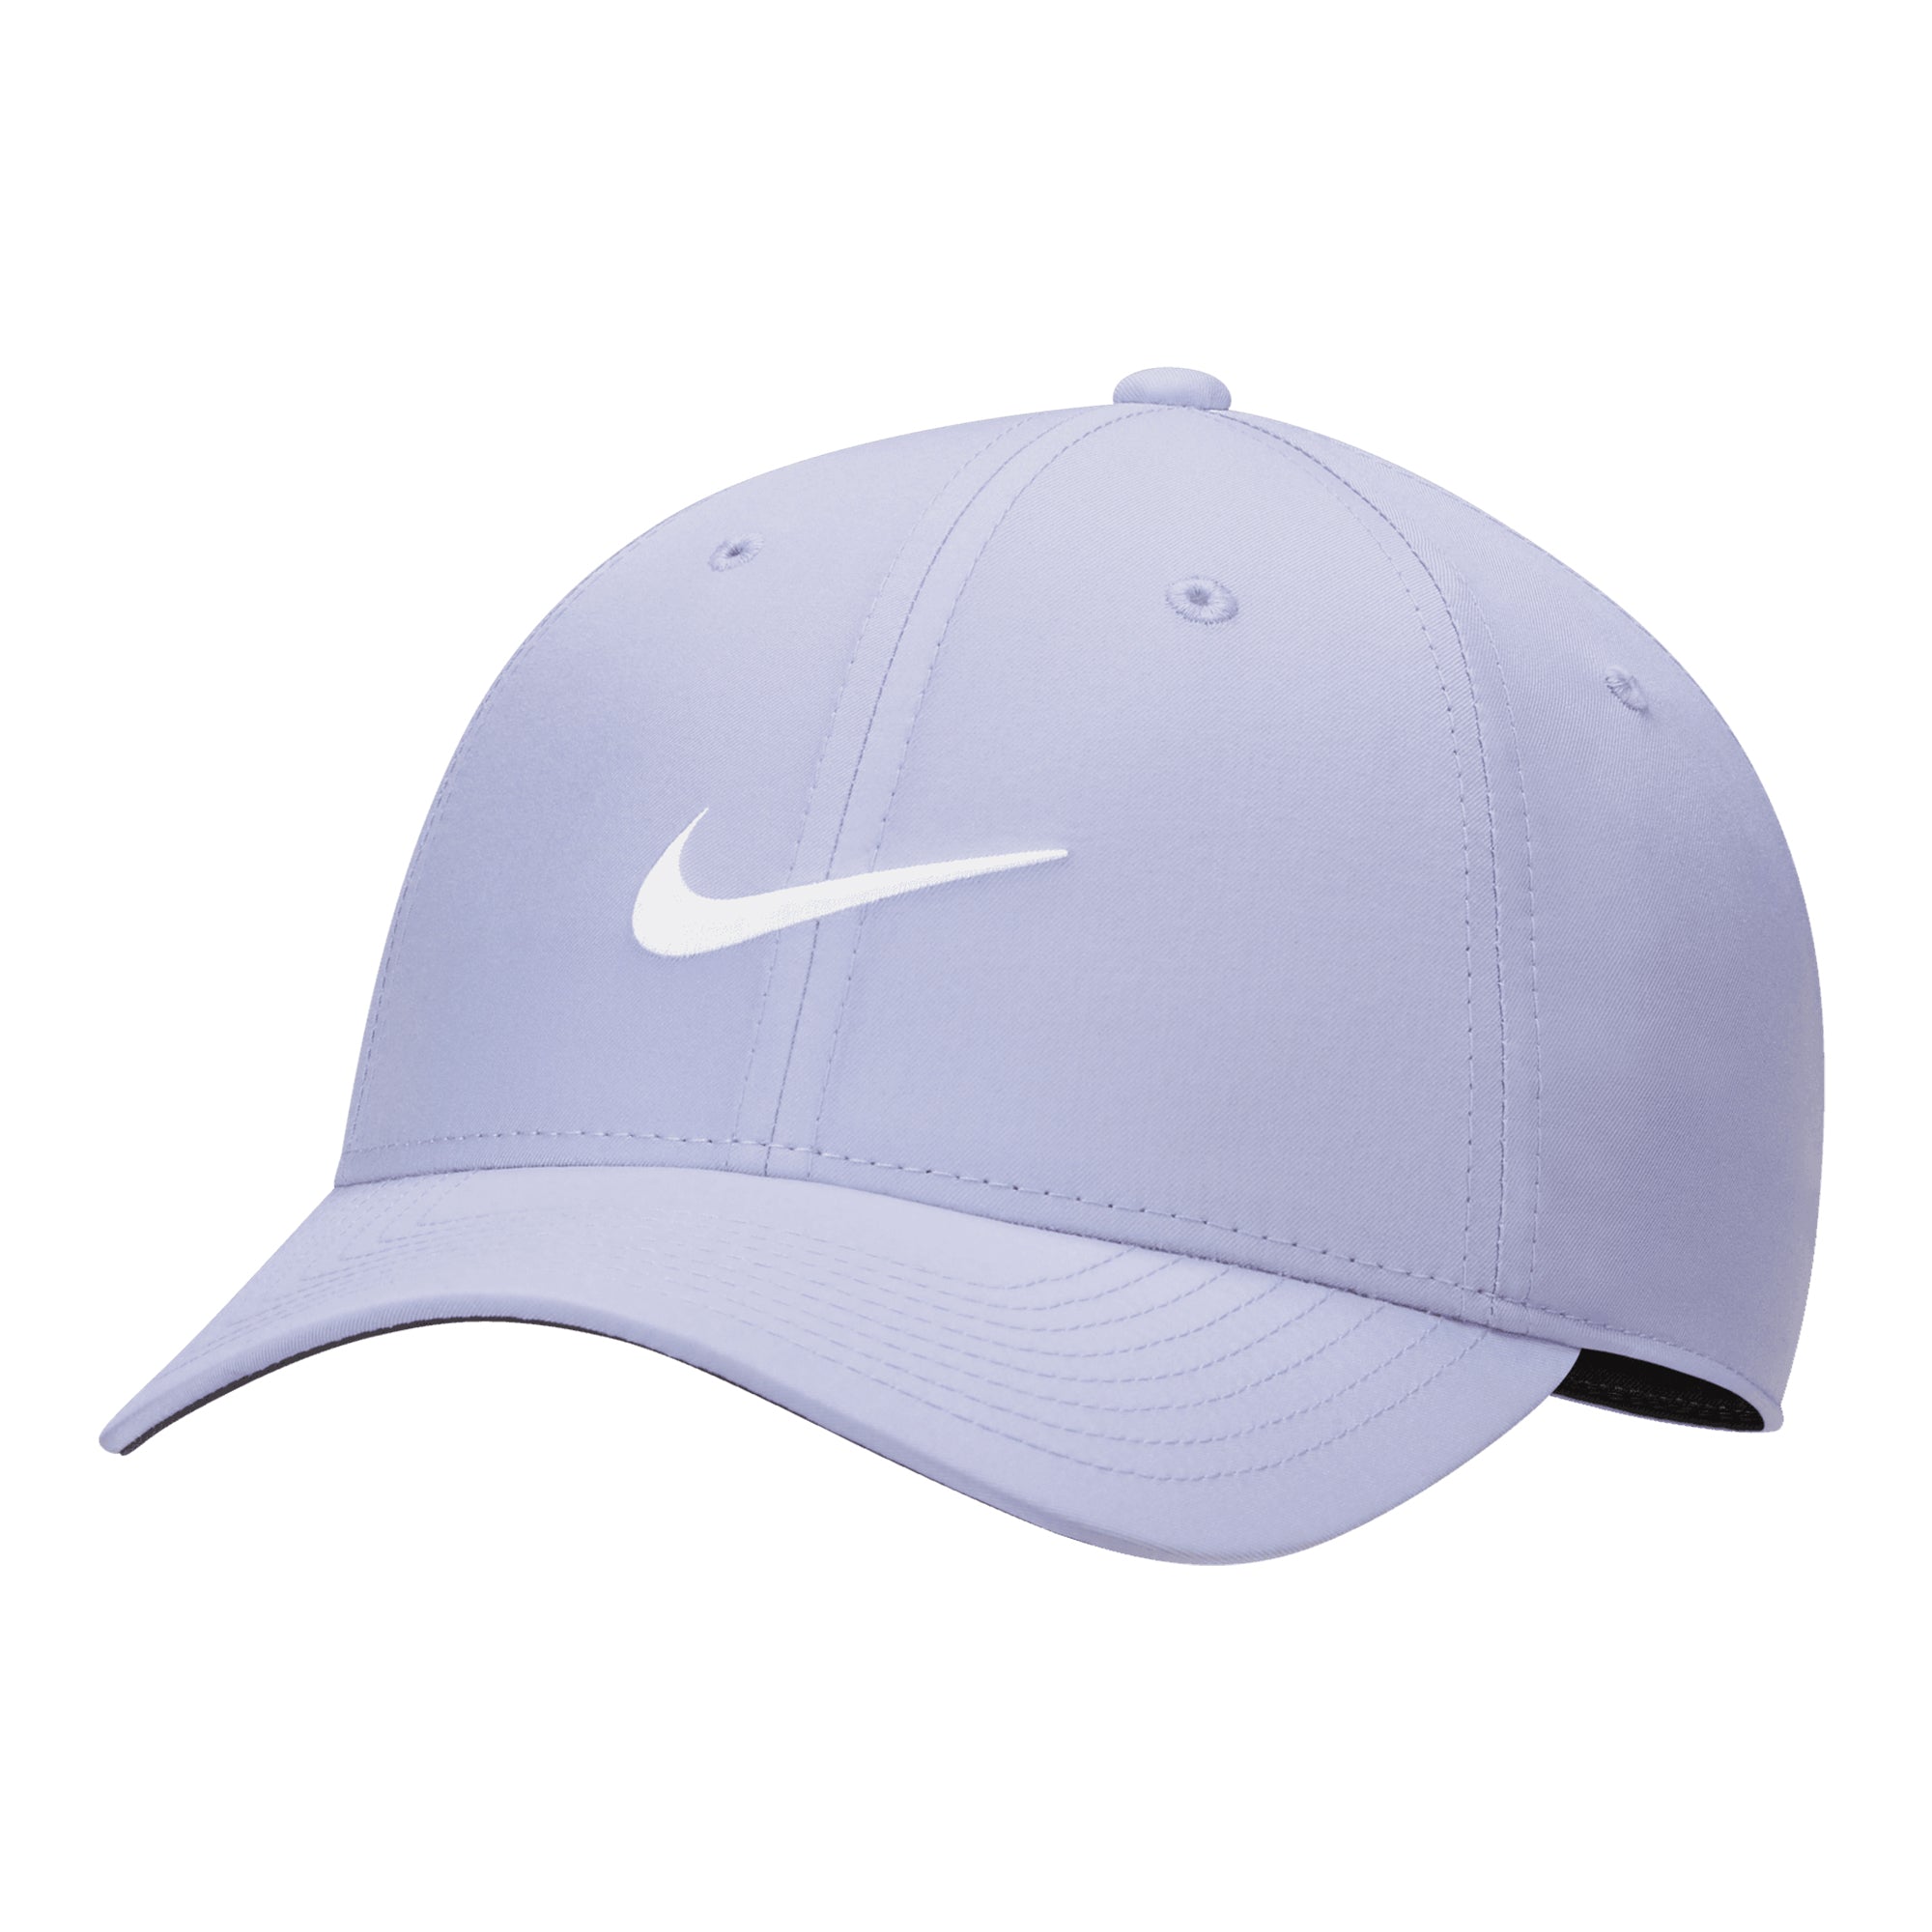 Perpetrator complications dignity Nike Golf Legacy 91 Tech Cap DH1640 Purple Pulse 580 | Function18